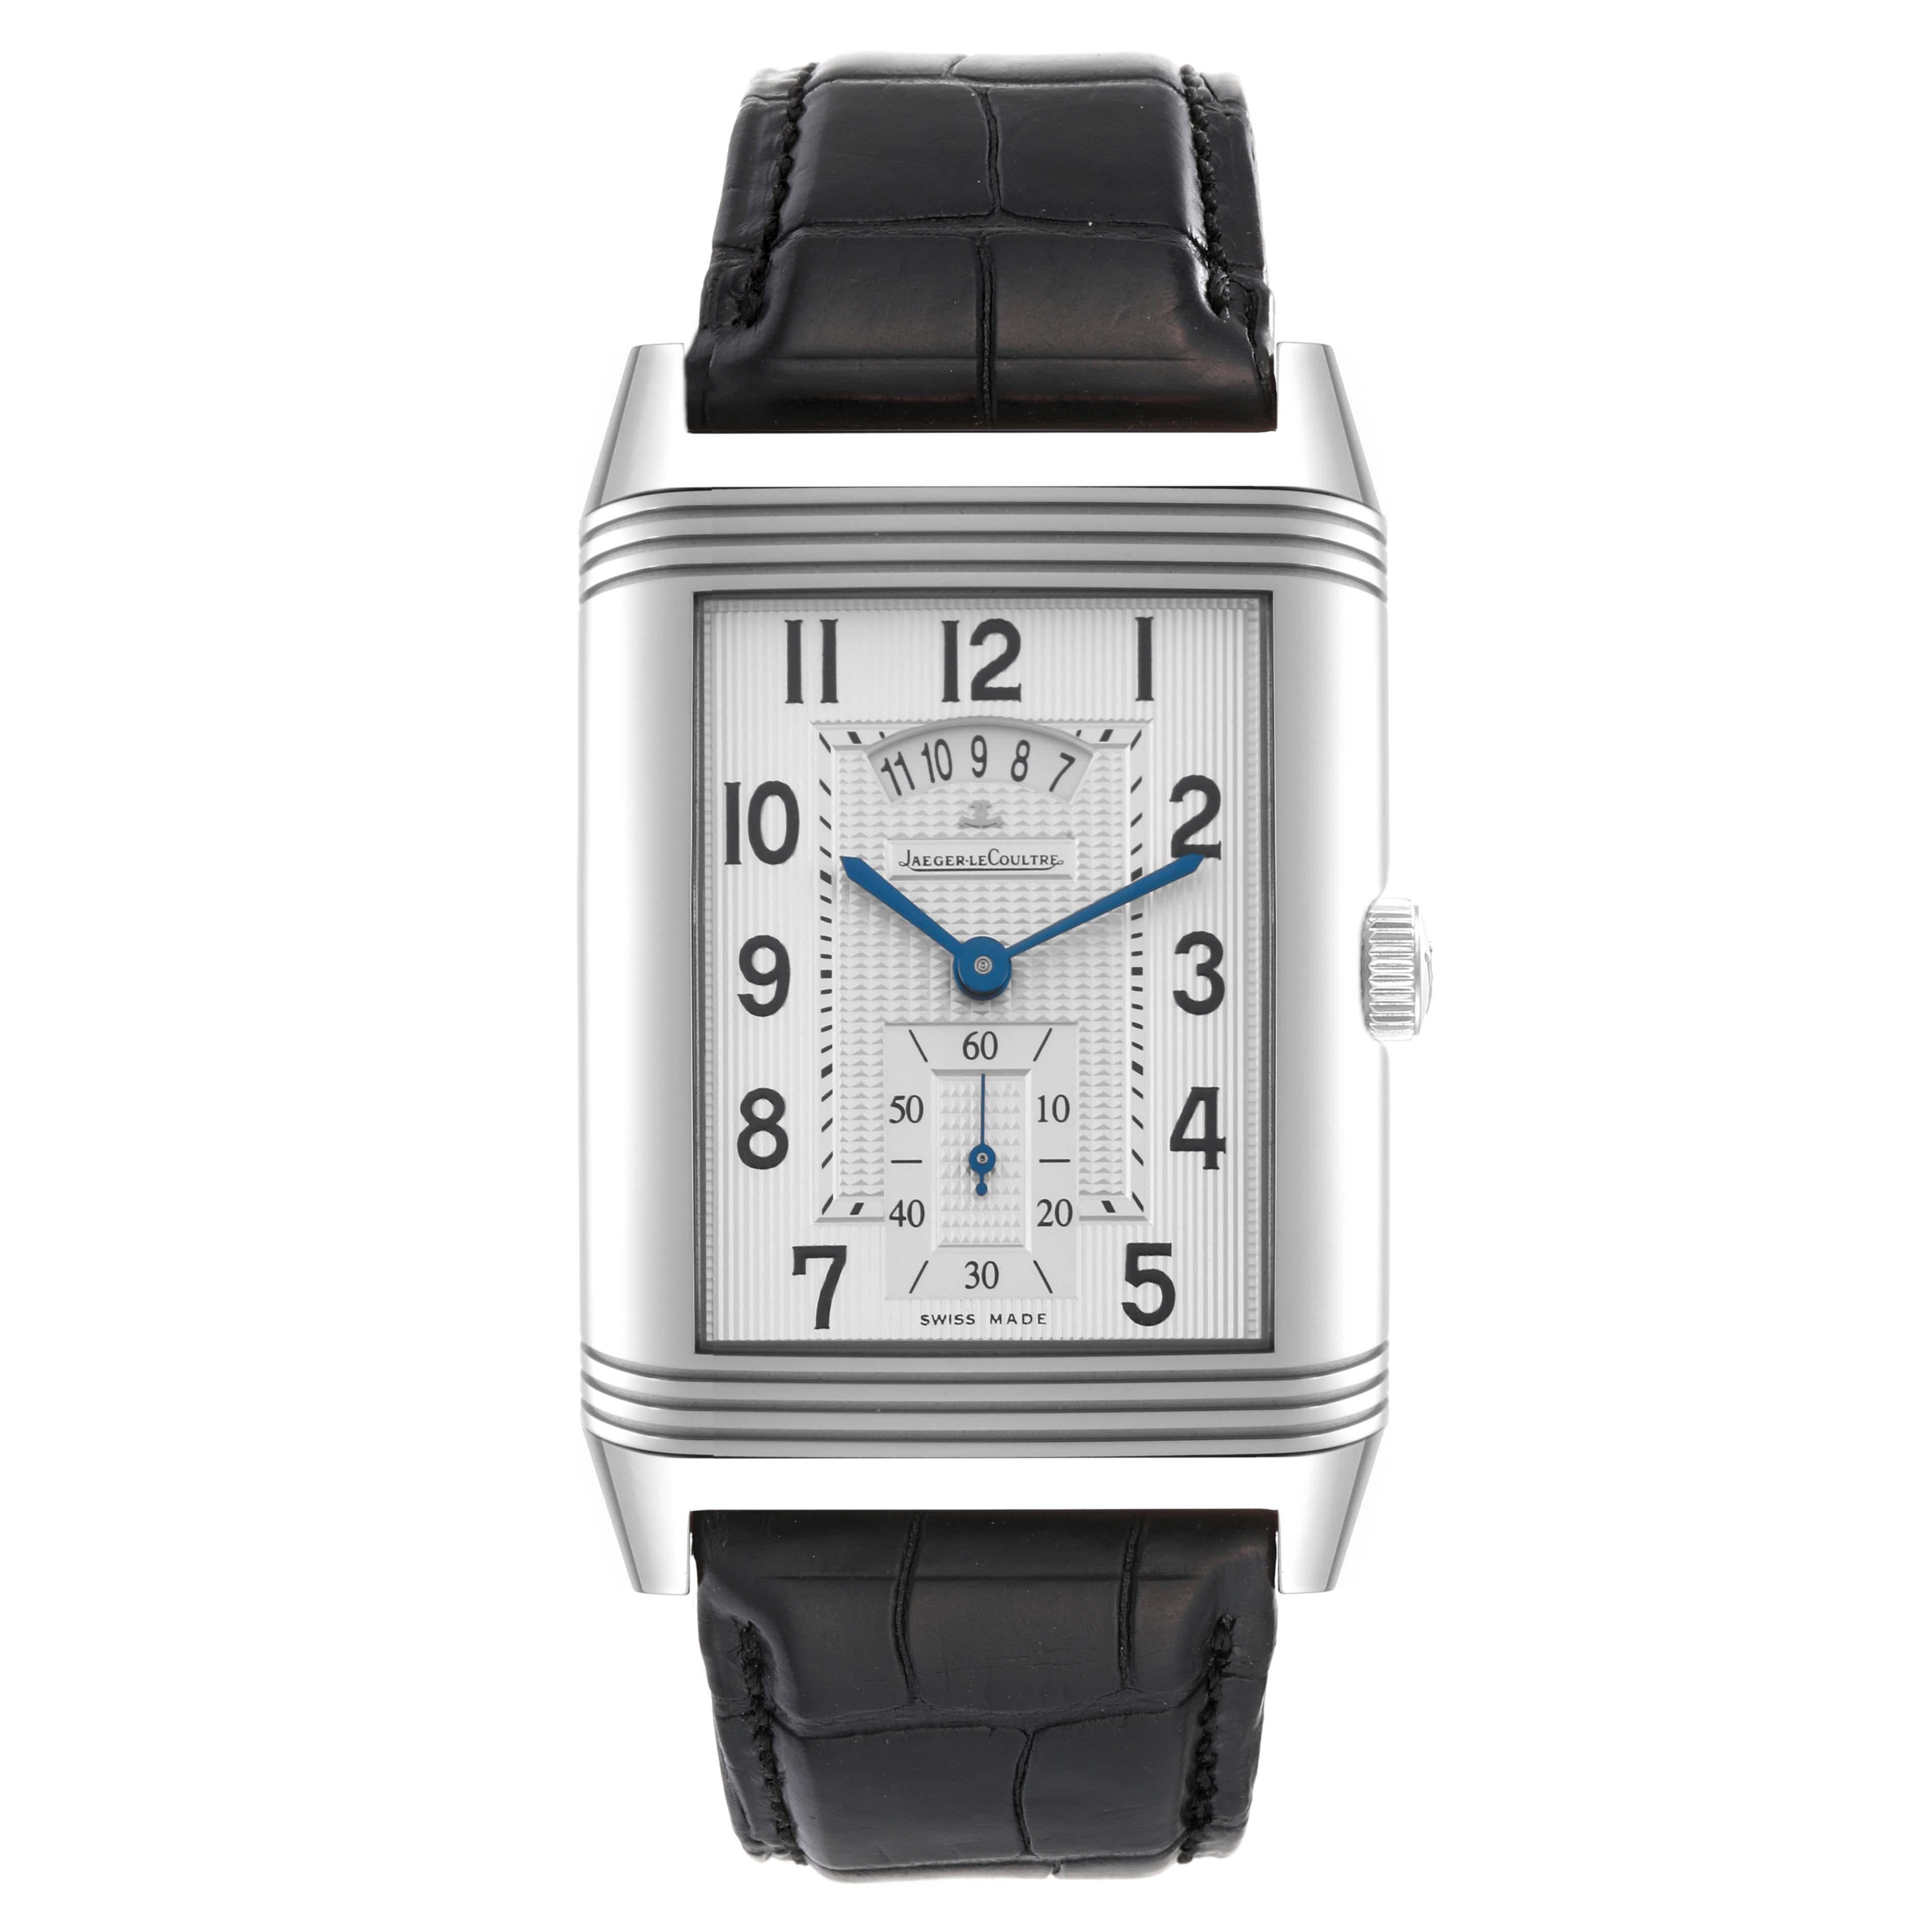 Jaeger LeCoultre Grande Reverso Steel Mens Watch 274.8.85 Q3748420 Box Papers. Manual winding movement. Stainless steel 32 x 52 mm rectangular case with reeded ends rotating within its back plate. Stainless steel bezel. Scratch resistant sapphire